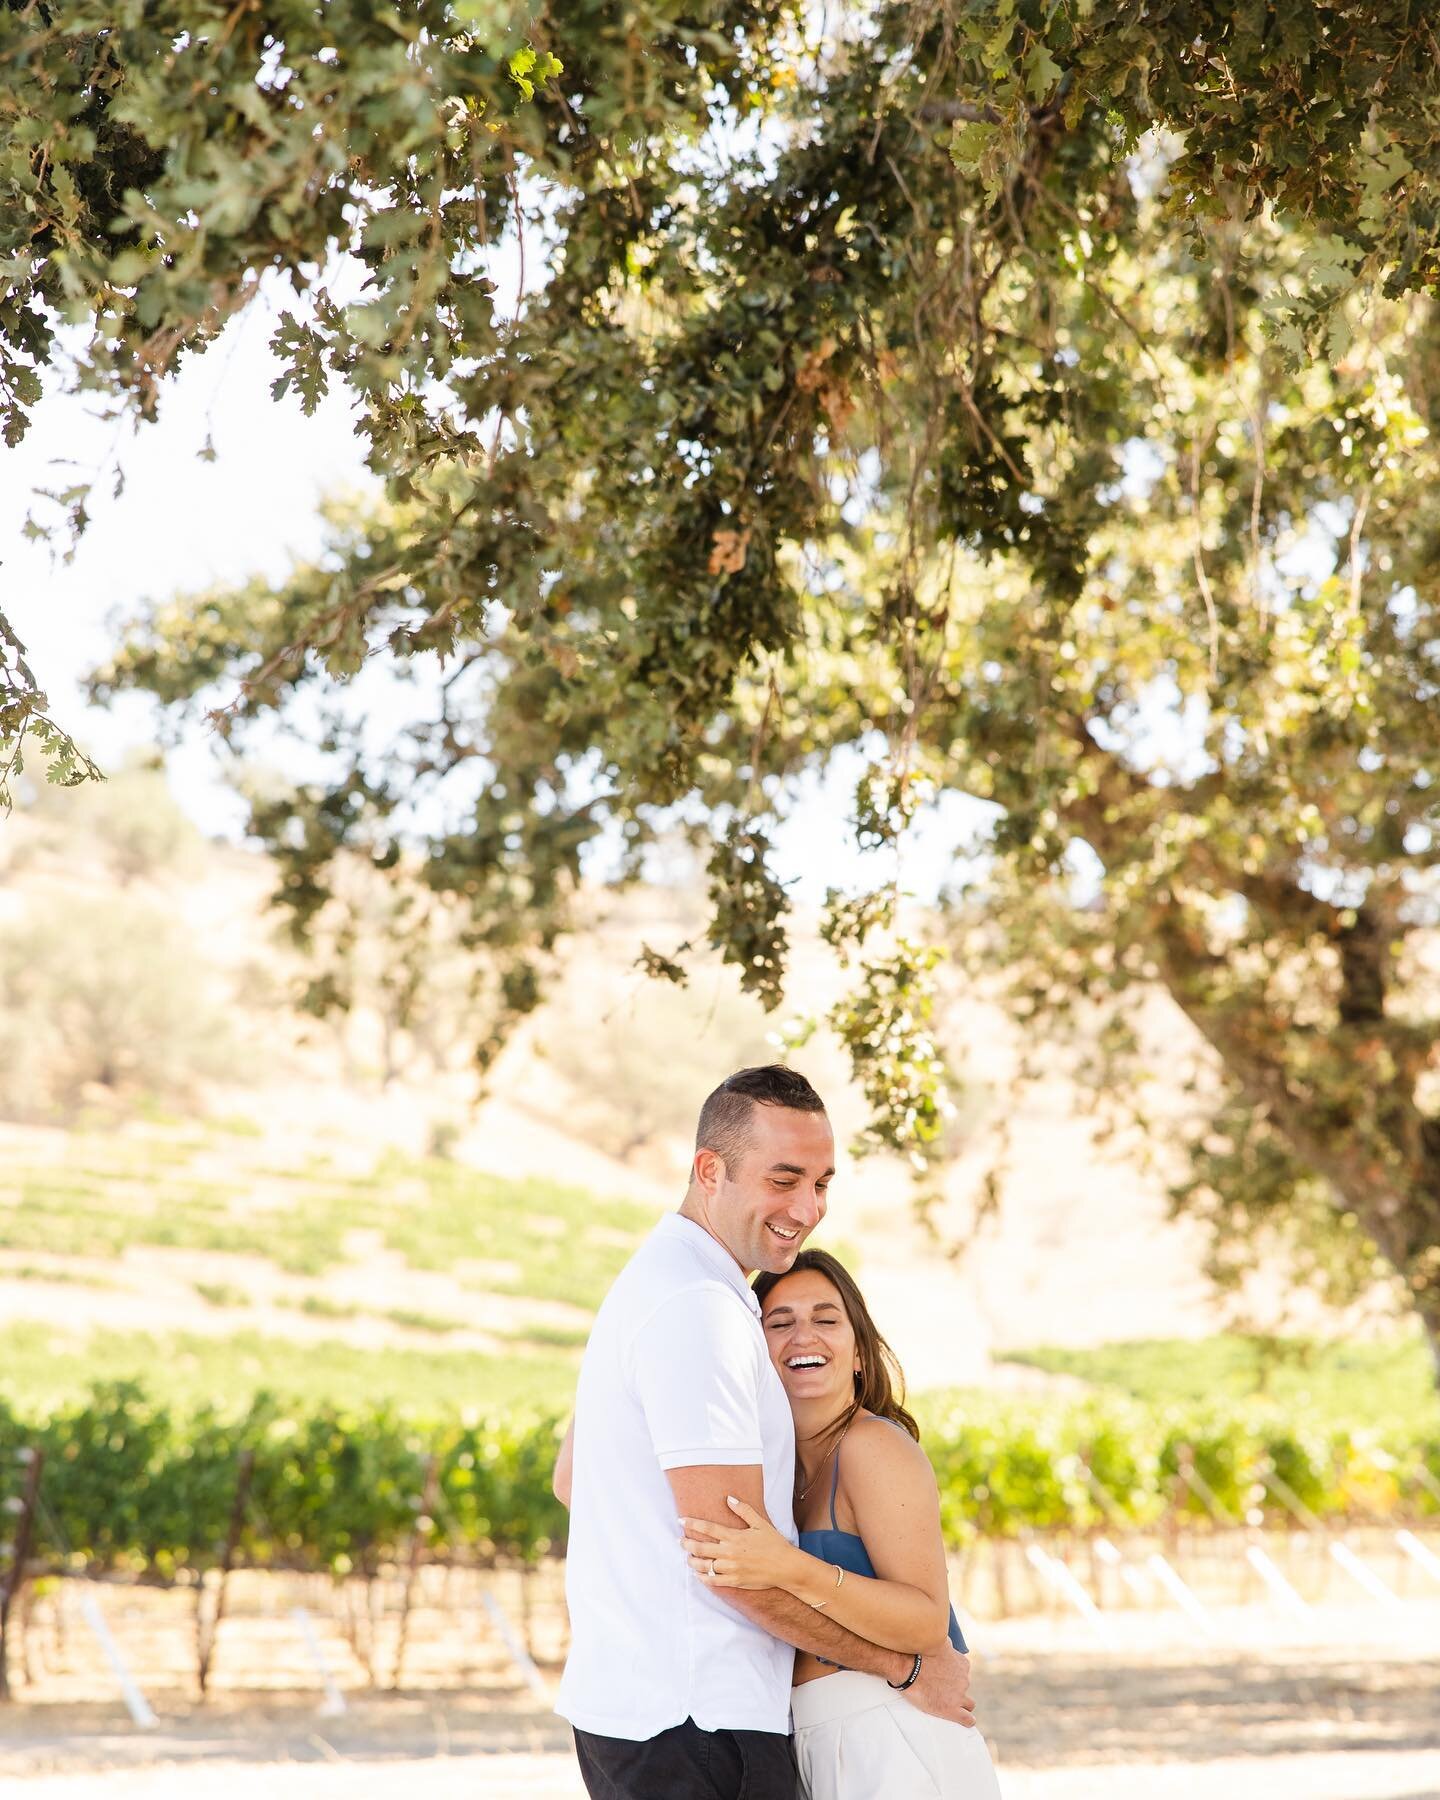 She planned a trip to Napa Valley to celebrate his birthday- but she was the one who got a surprise! Congrats to these two on their engagement!